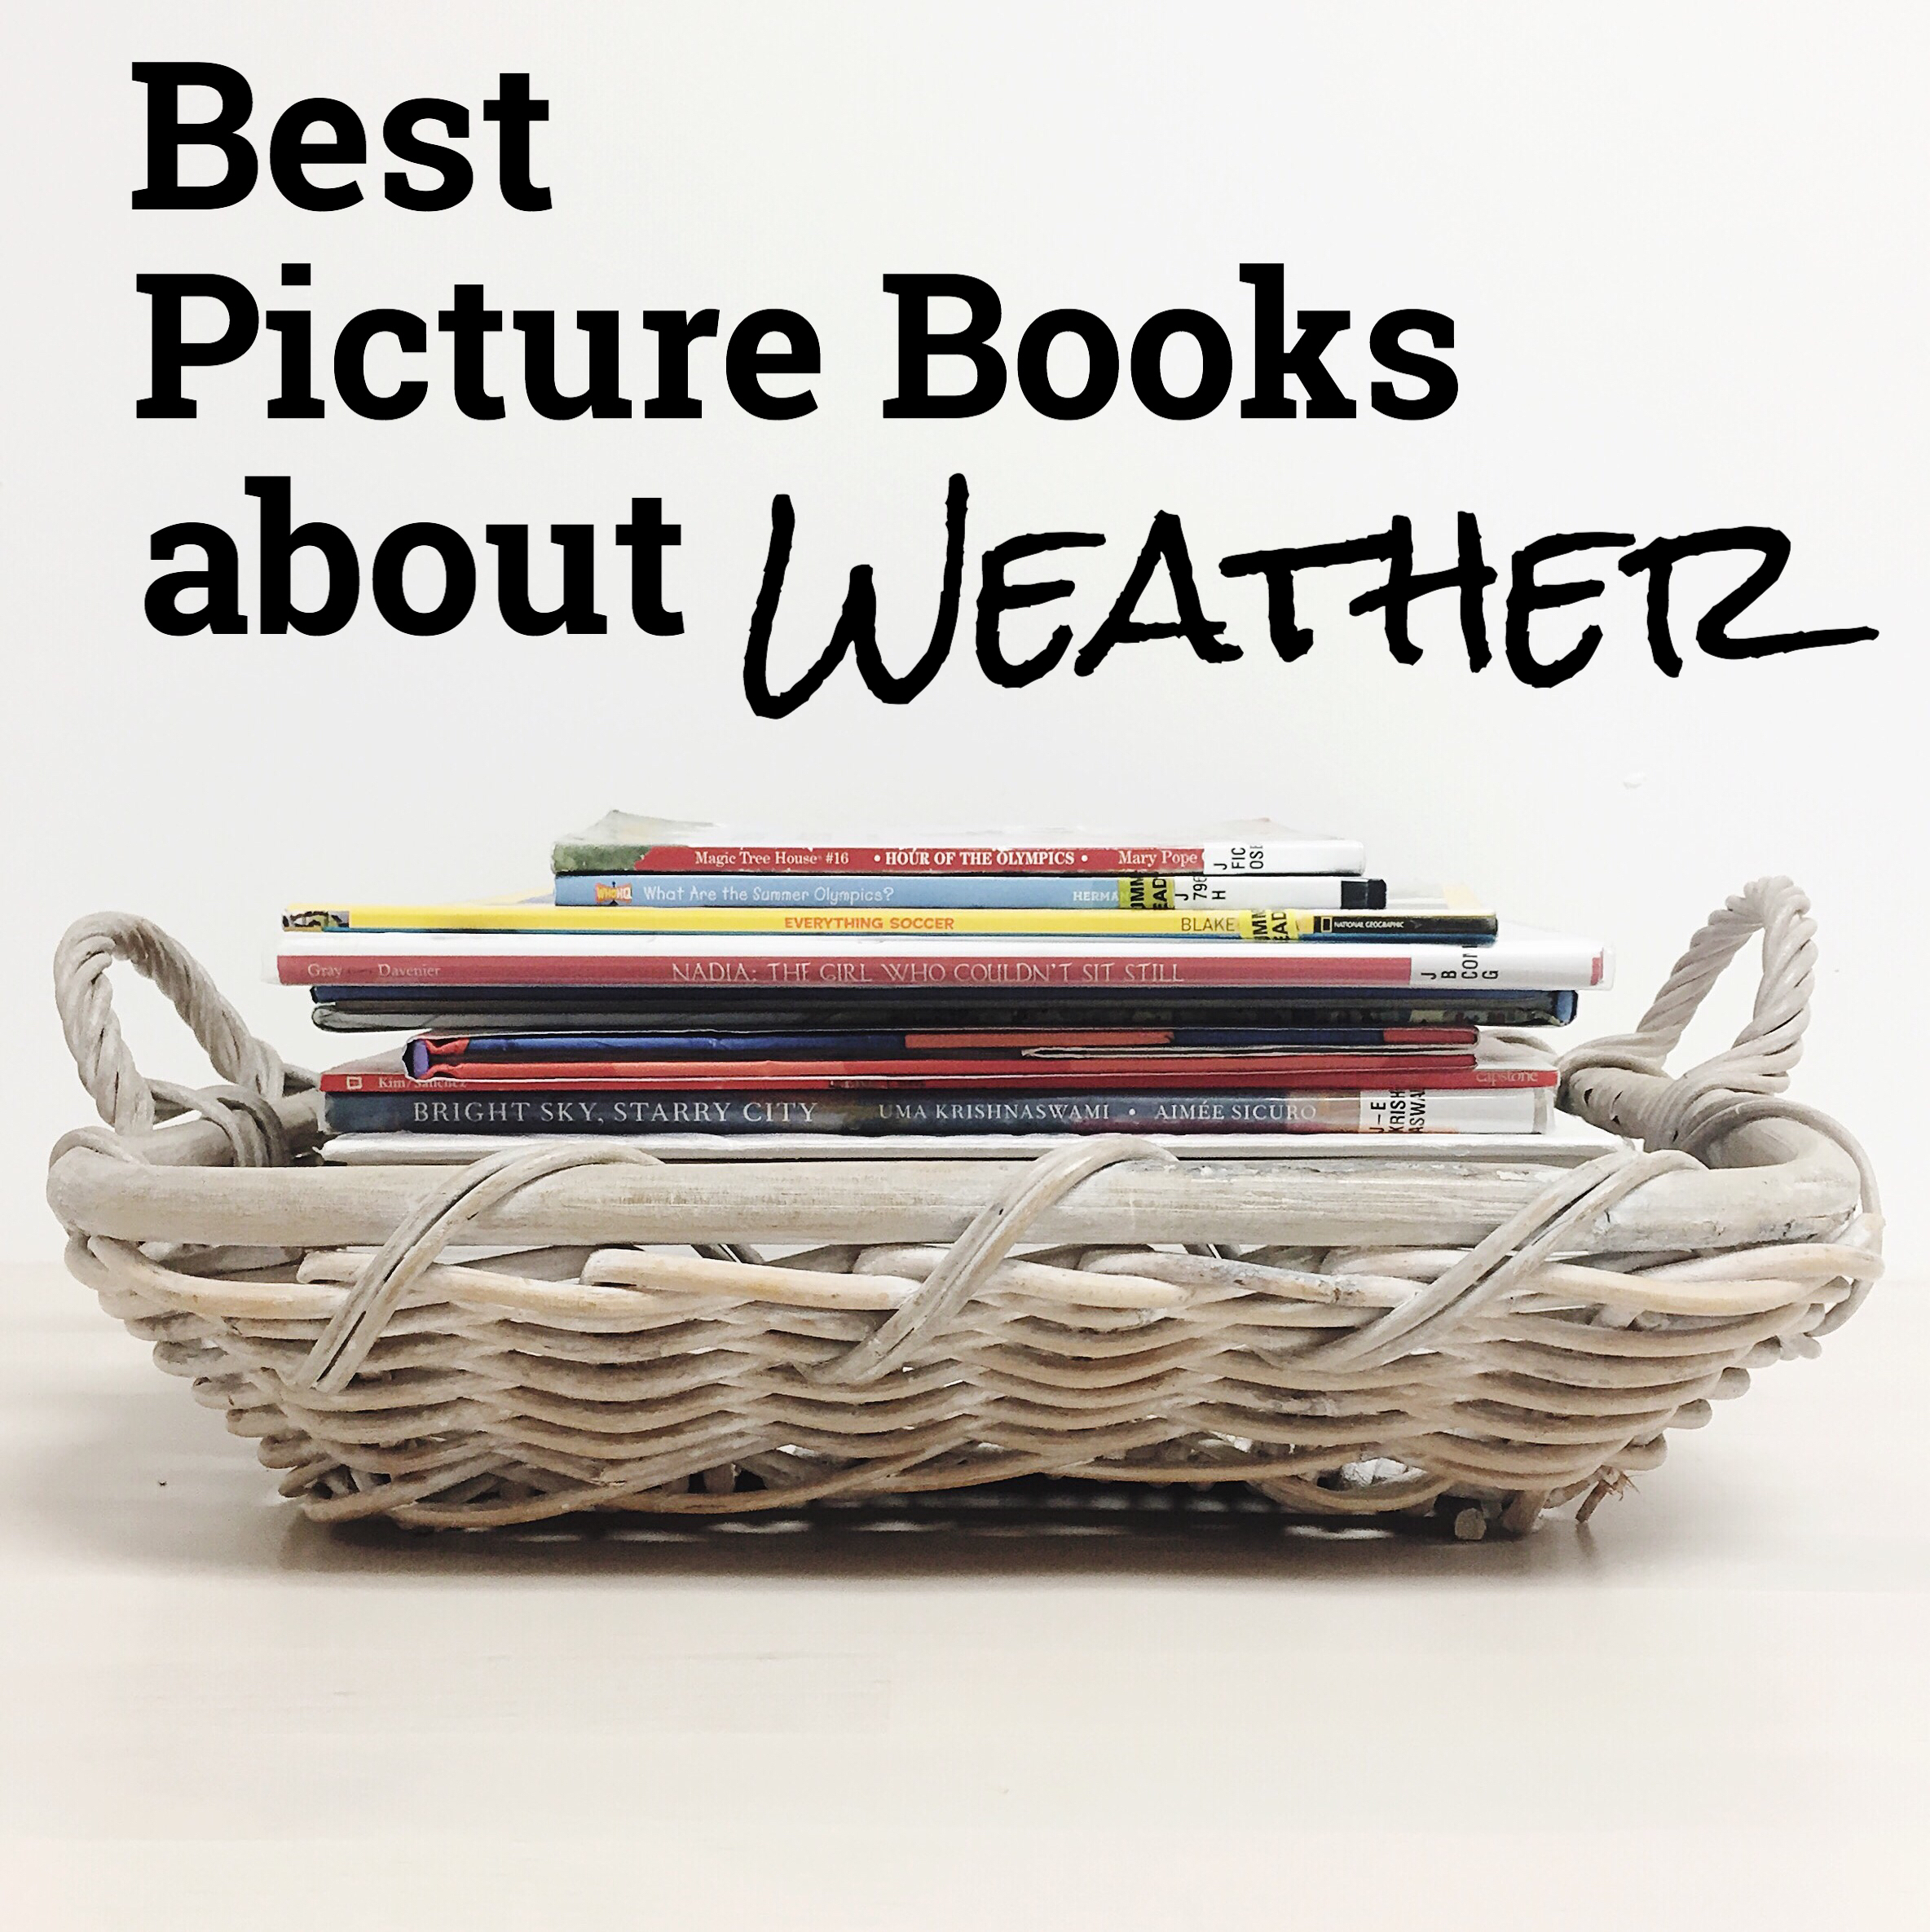 Best Picture Books for a Rainy Day